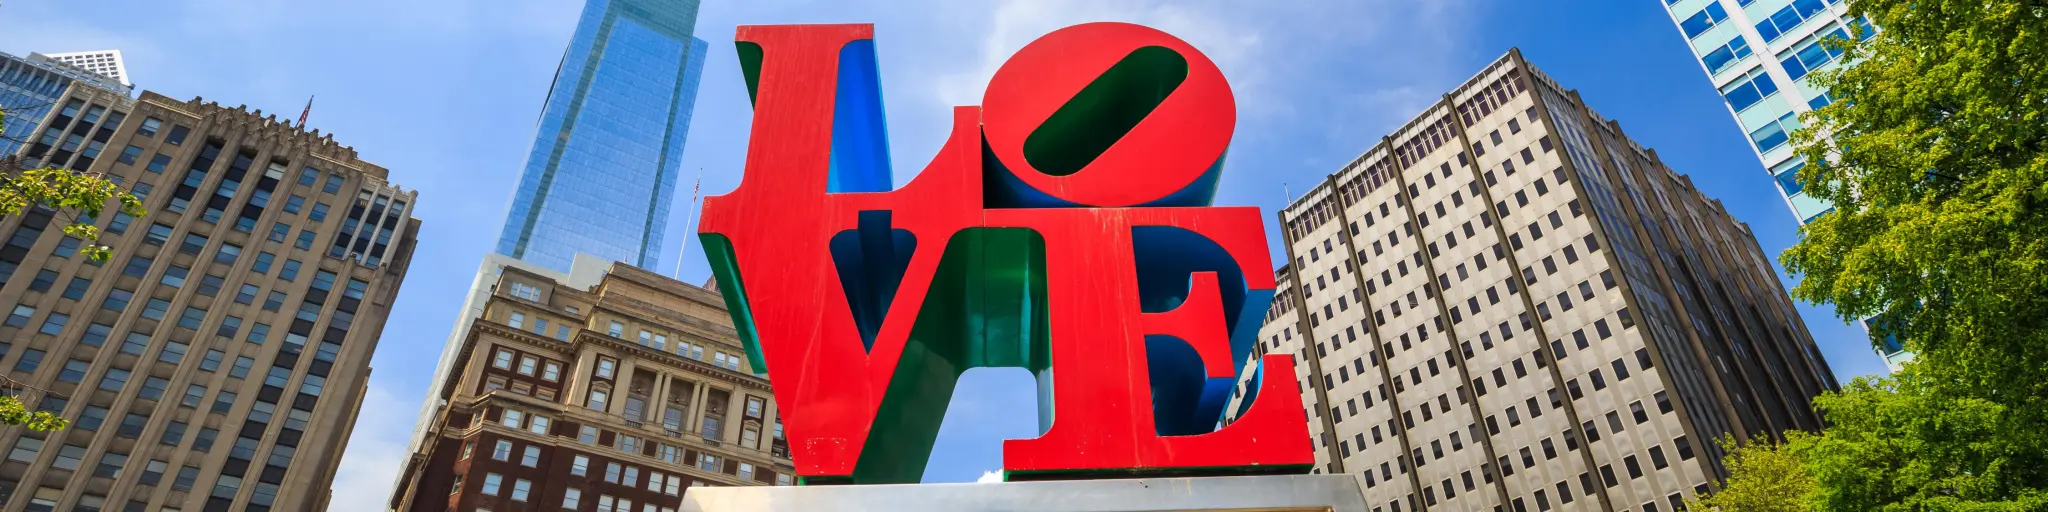 Famous red "Love" statue in Philadelphia on a sunny day